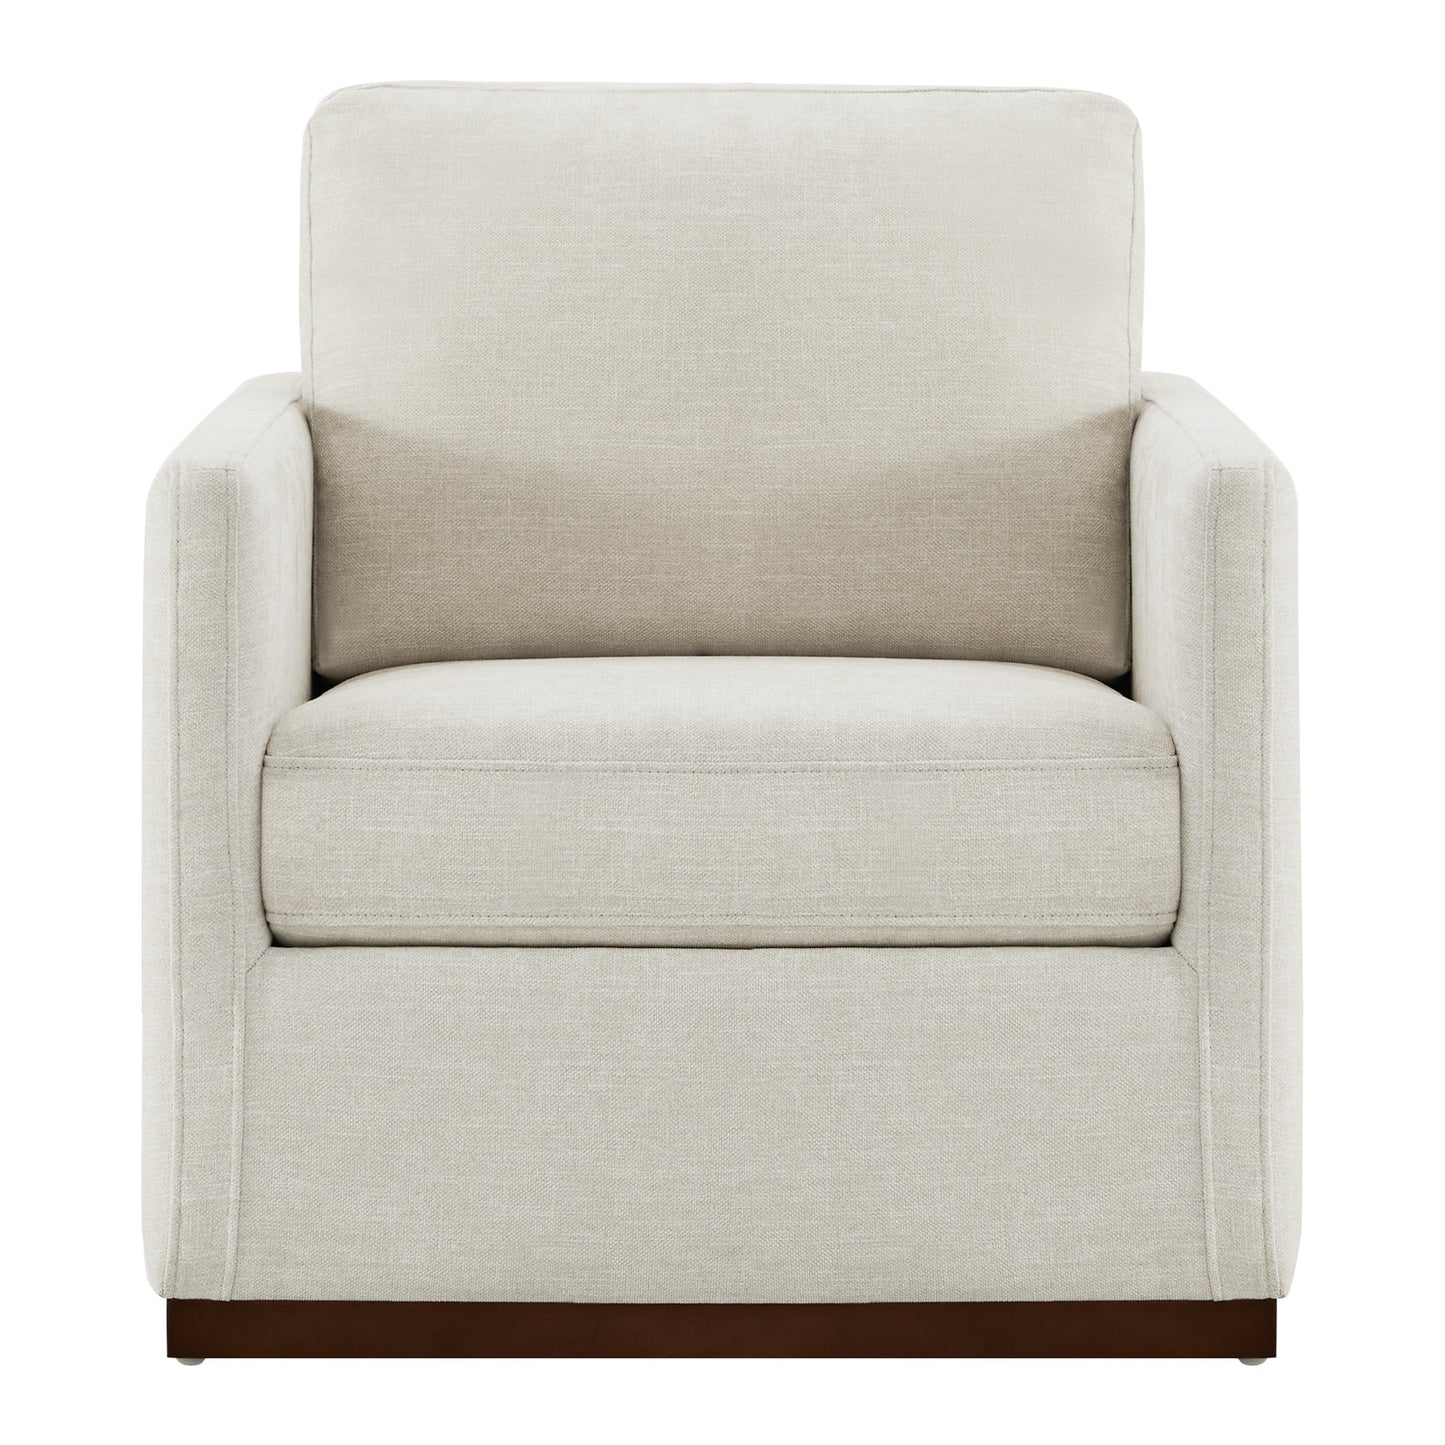 CHITA LIVING-Henry Swivel Accent Chair with Wood Base-Accent Chair-Fabric-Linen-